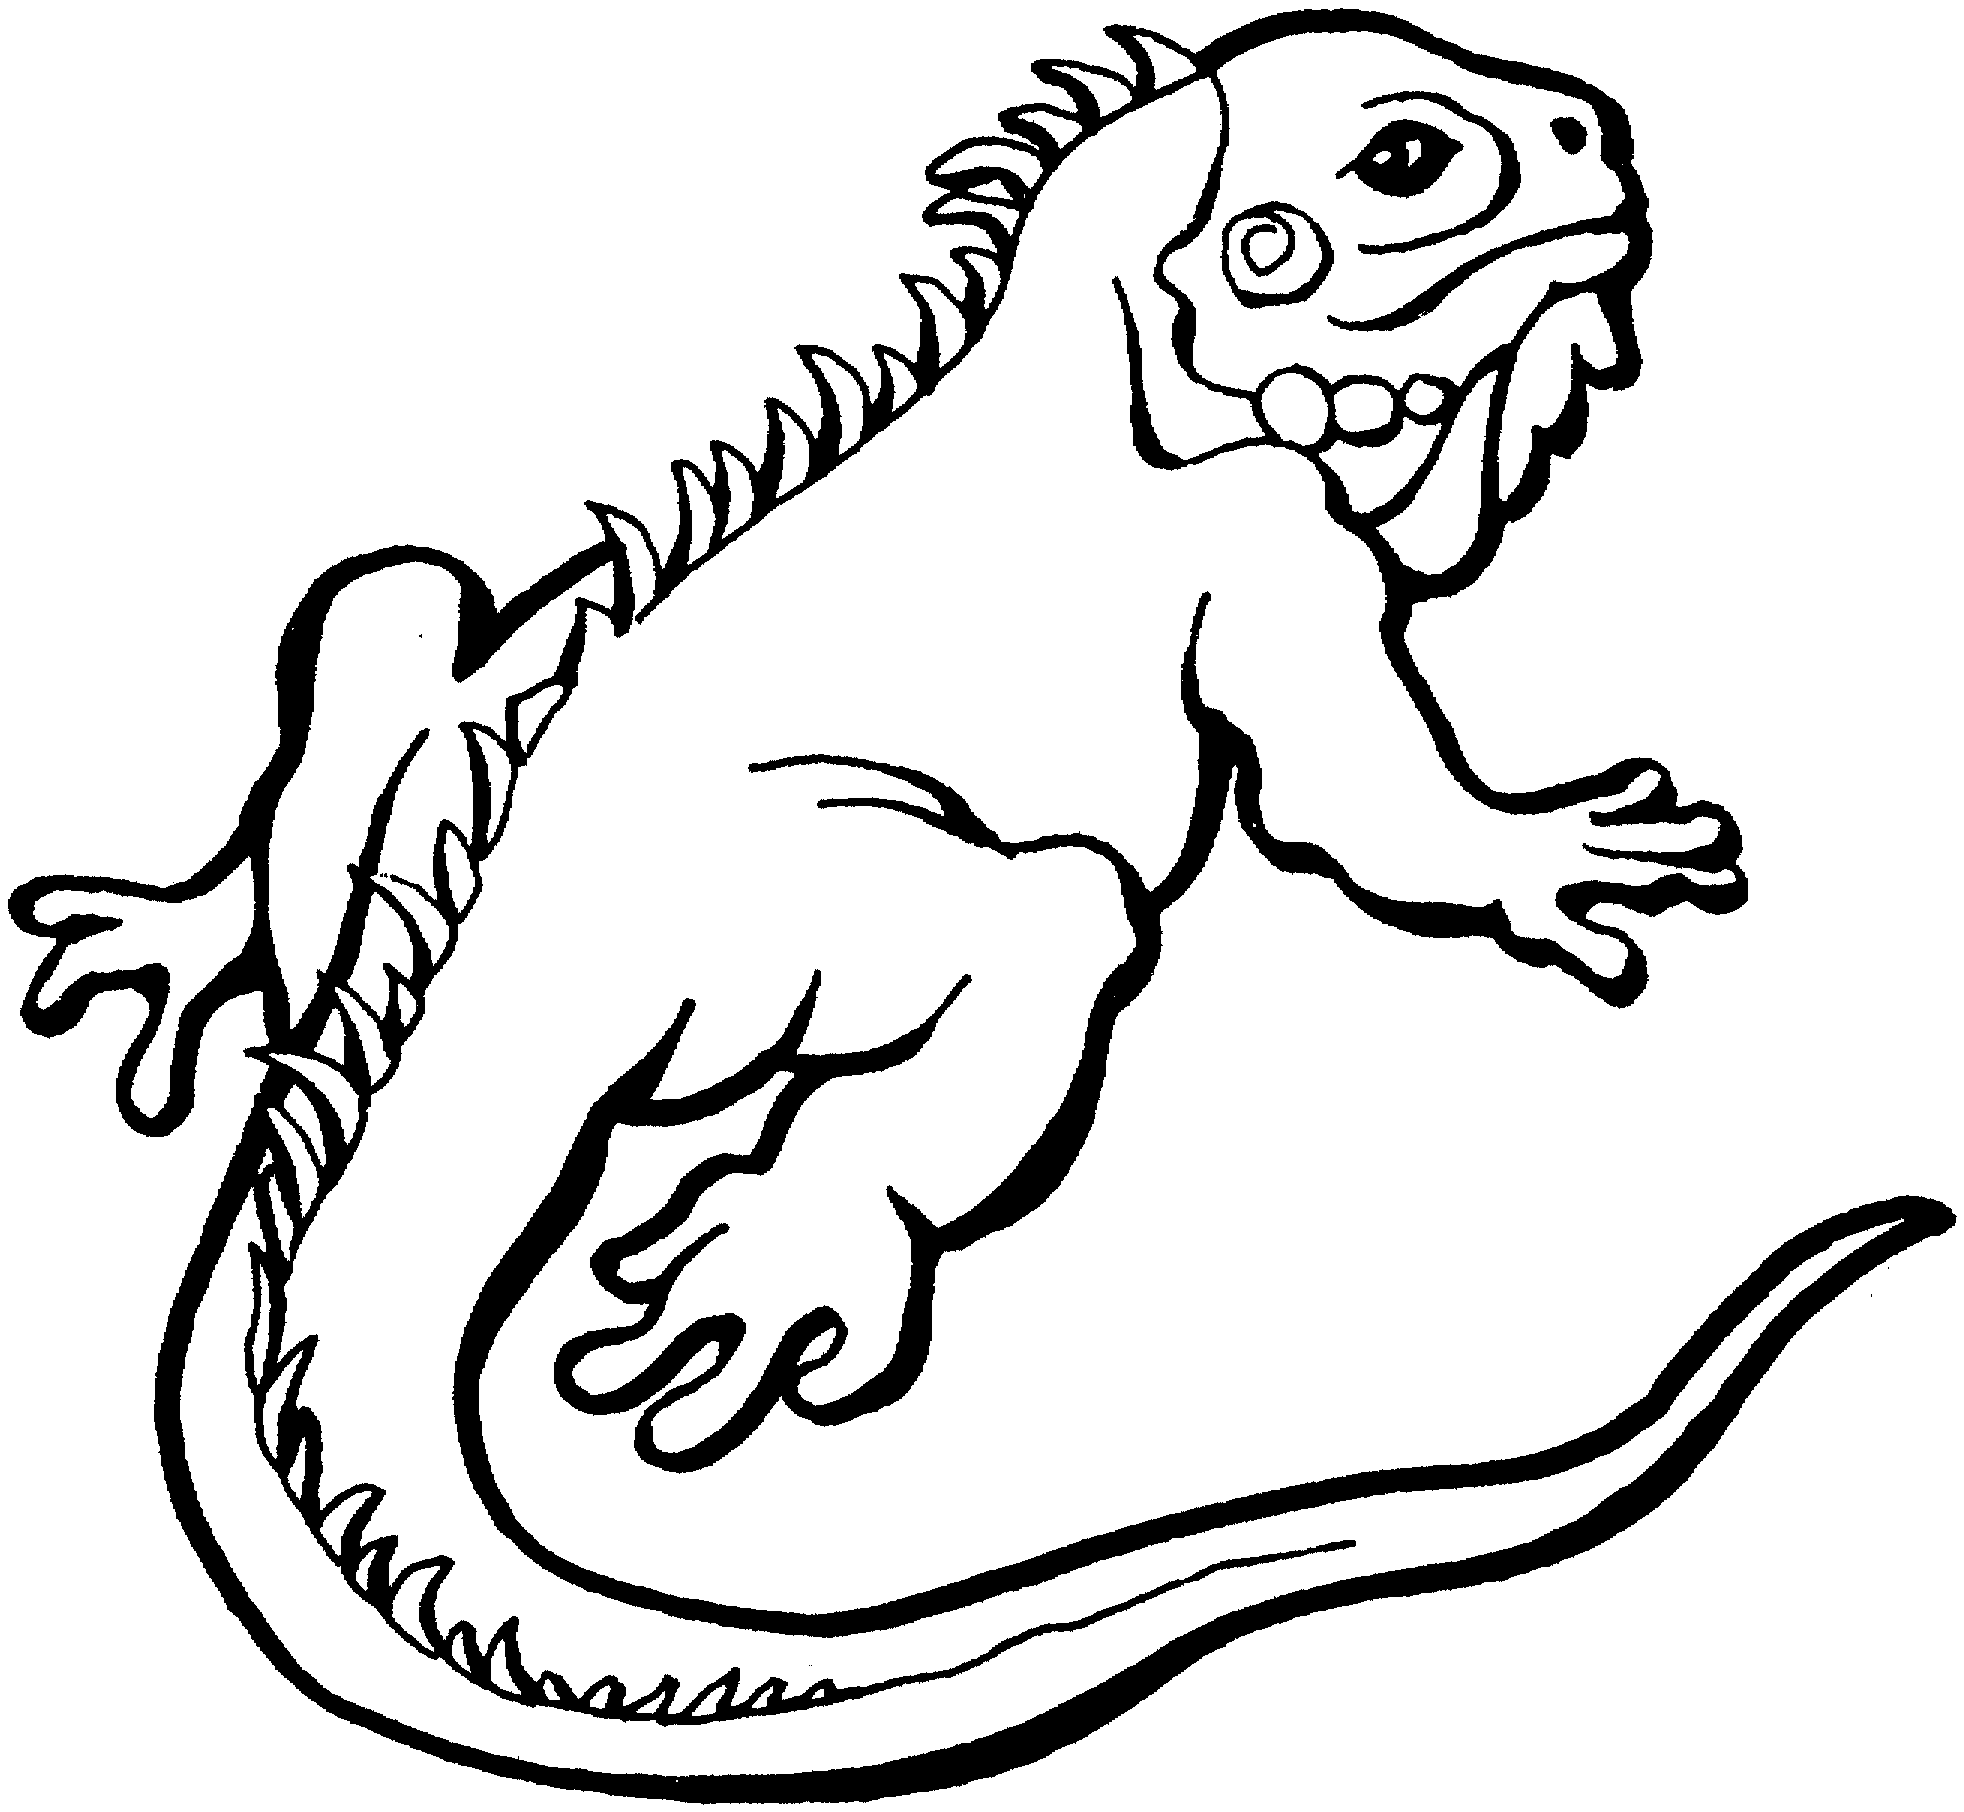 Iguana clipart #4, Download drawings